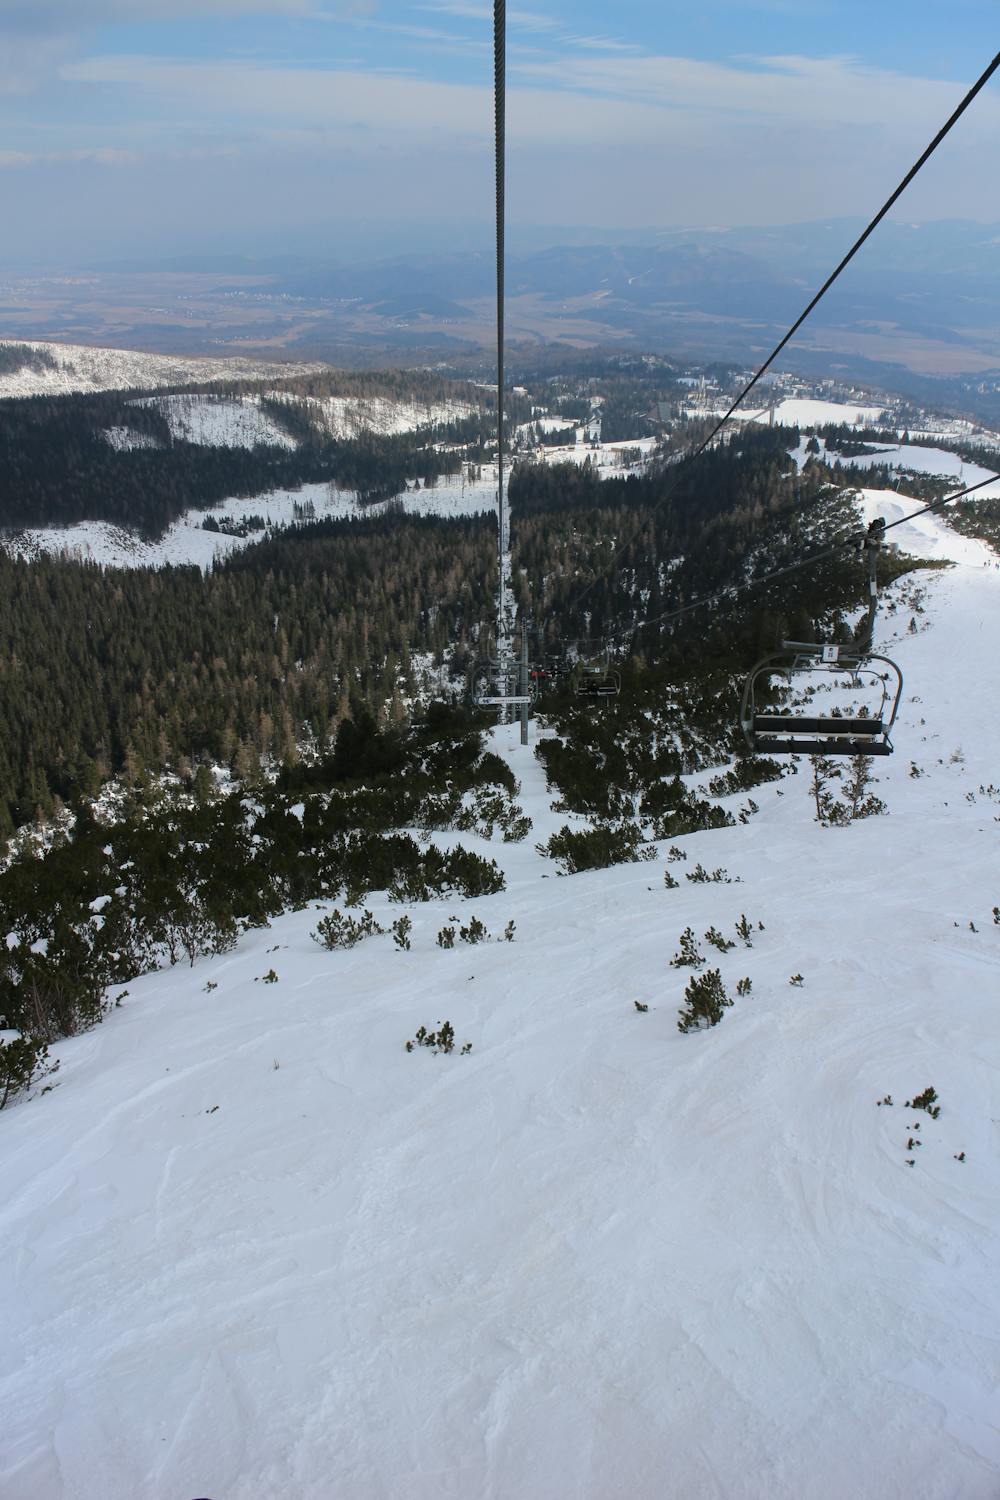 Looking down the chairlift towards Strbské Pleso